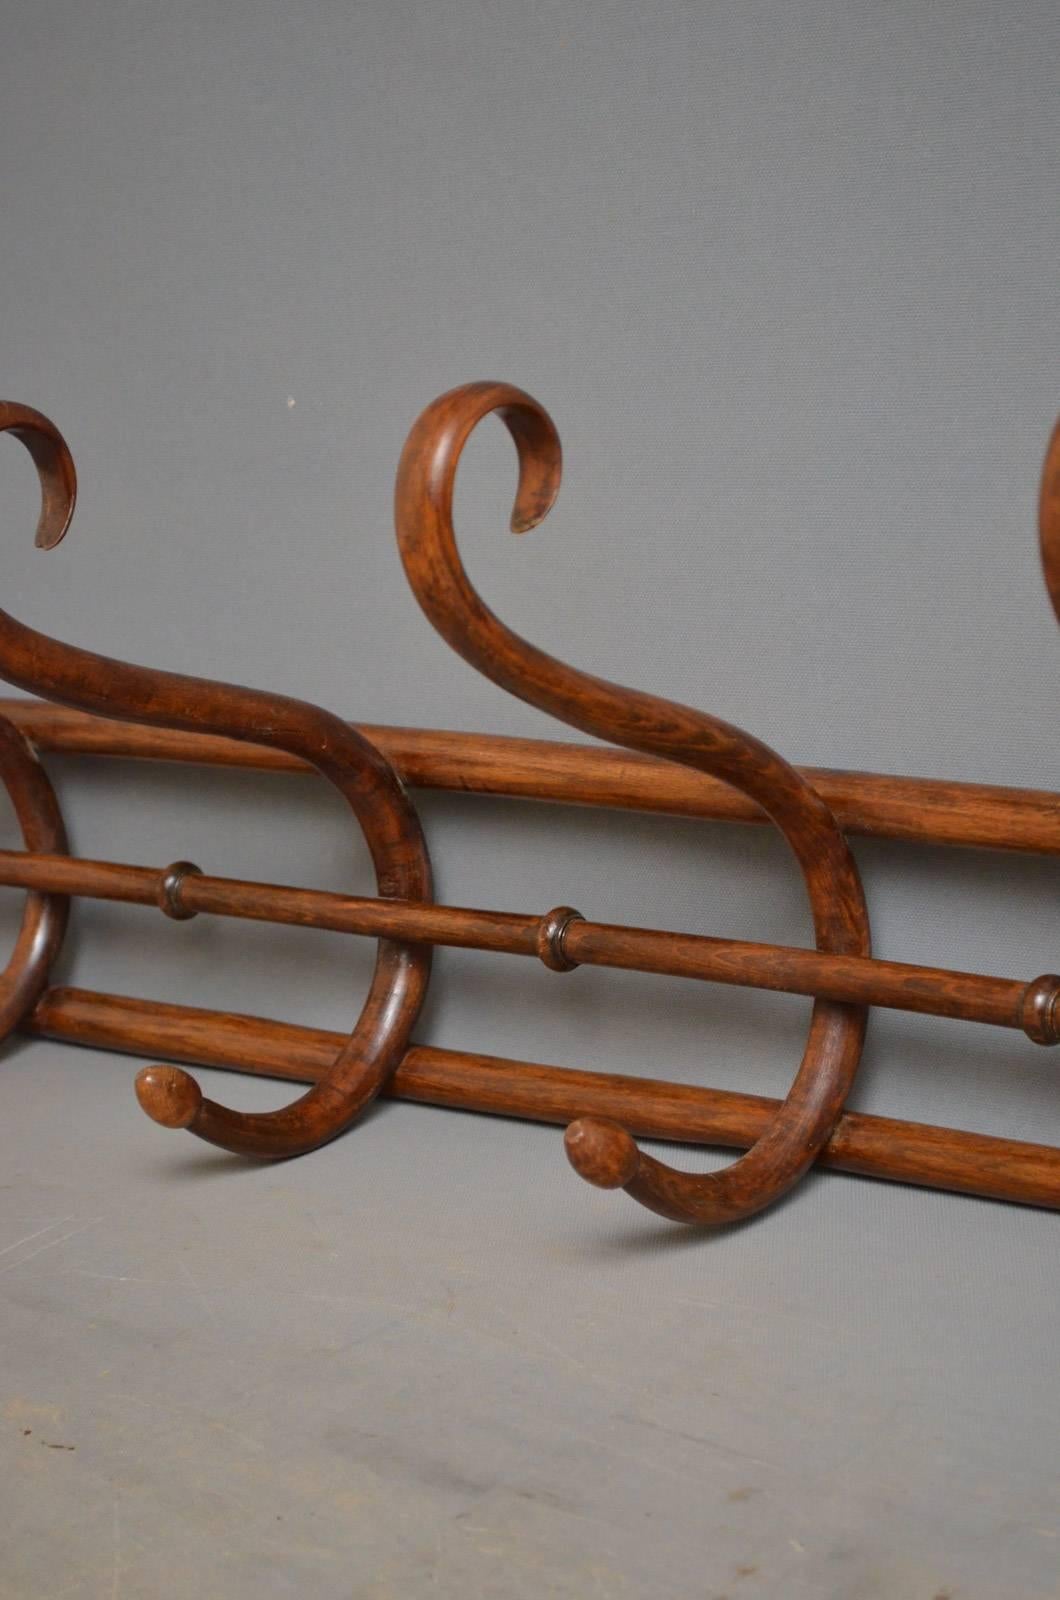 K0326, early 20th century bentwood coat hooks / hat hooks with five S-shaped hooks and turned decoration. All in original condition, circa 1910
Measures: H 11